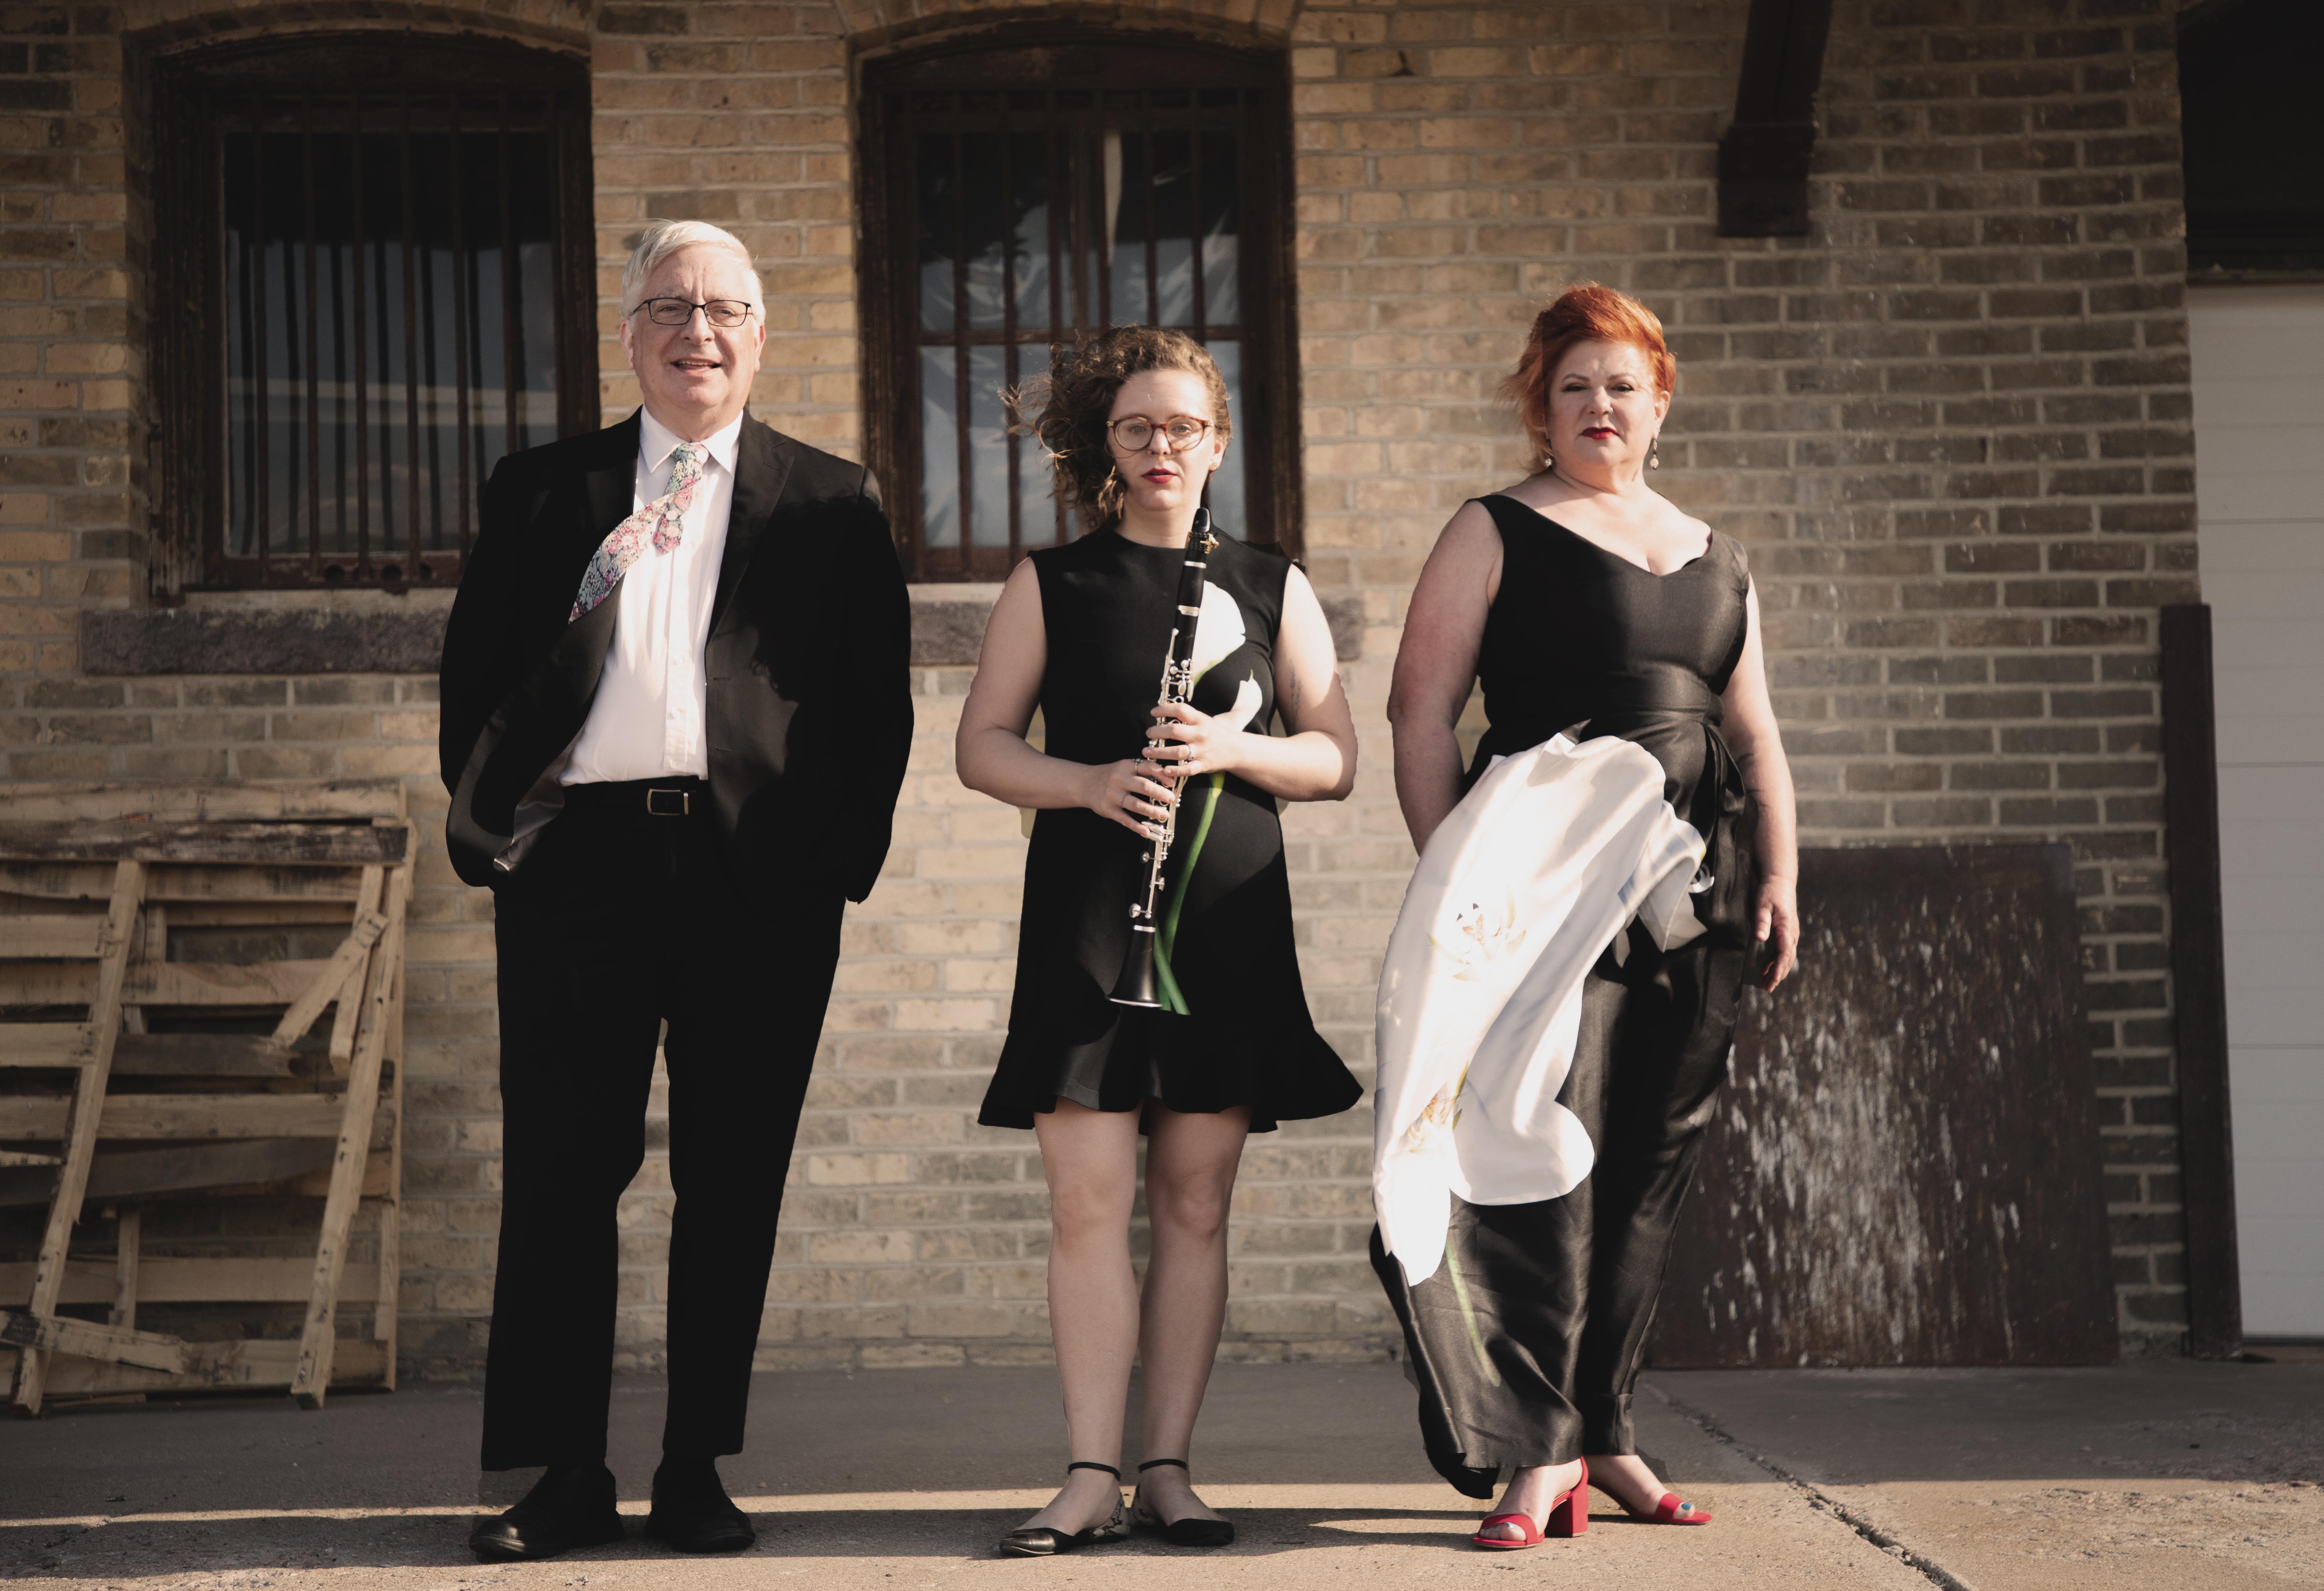 Three musicians standing outside a building